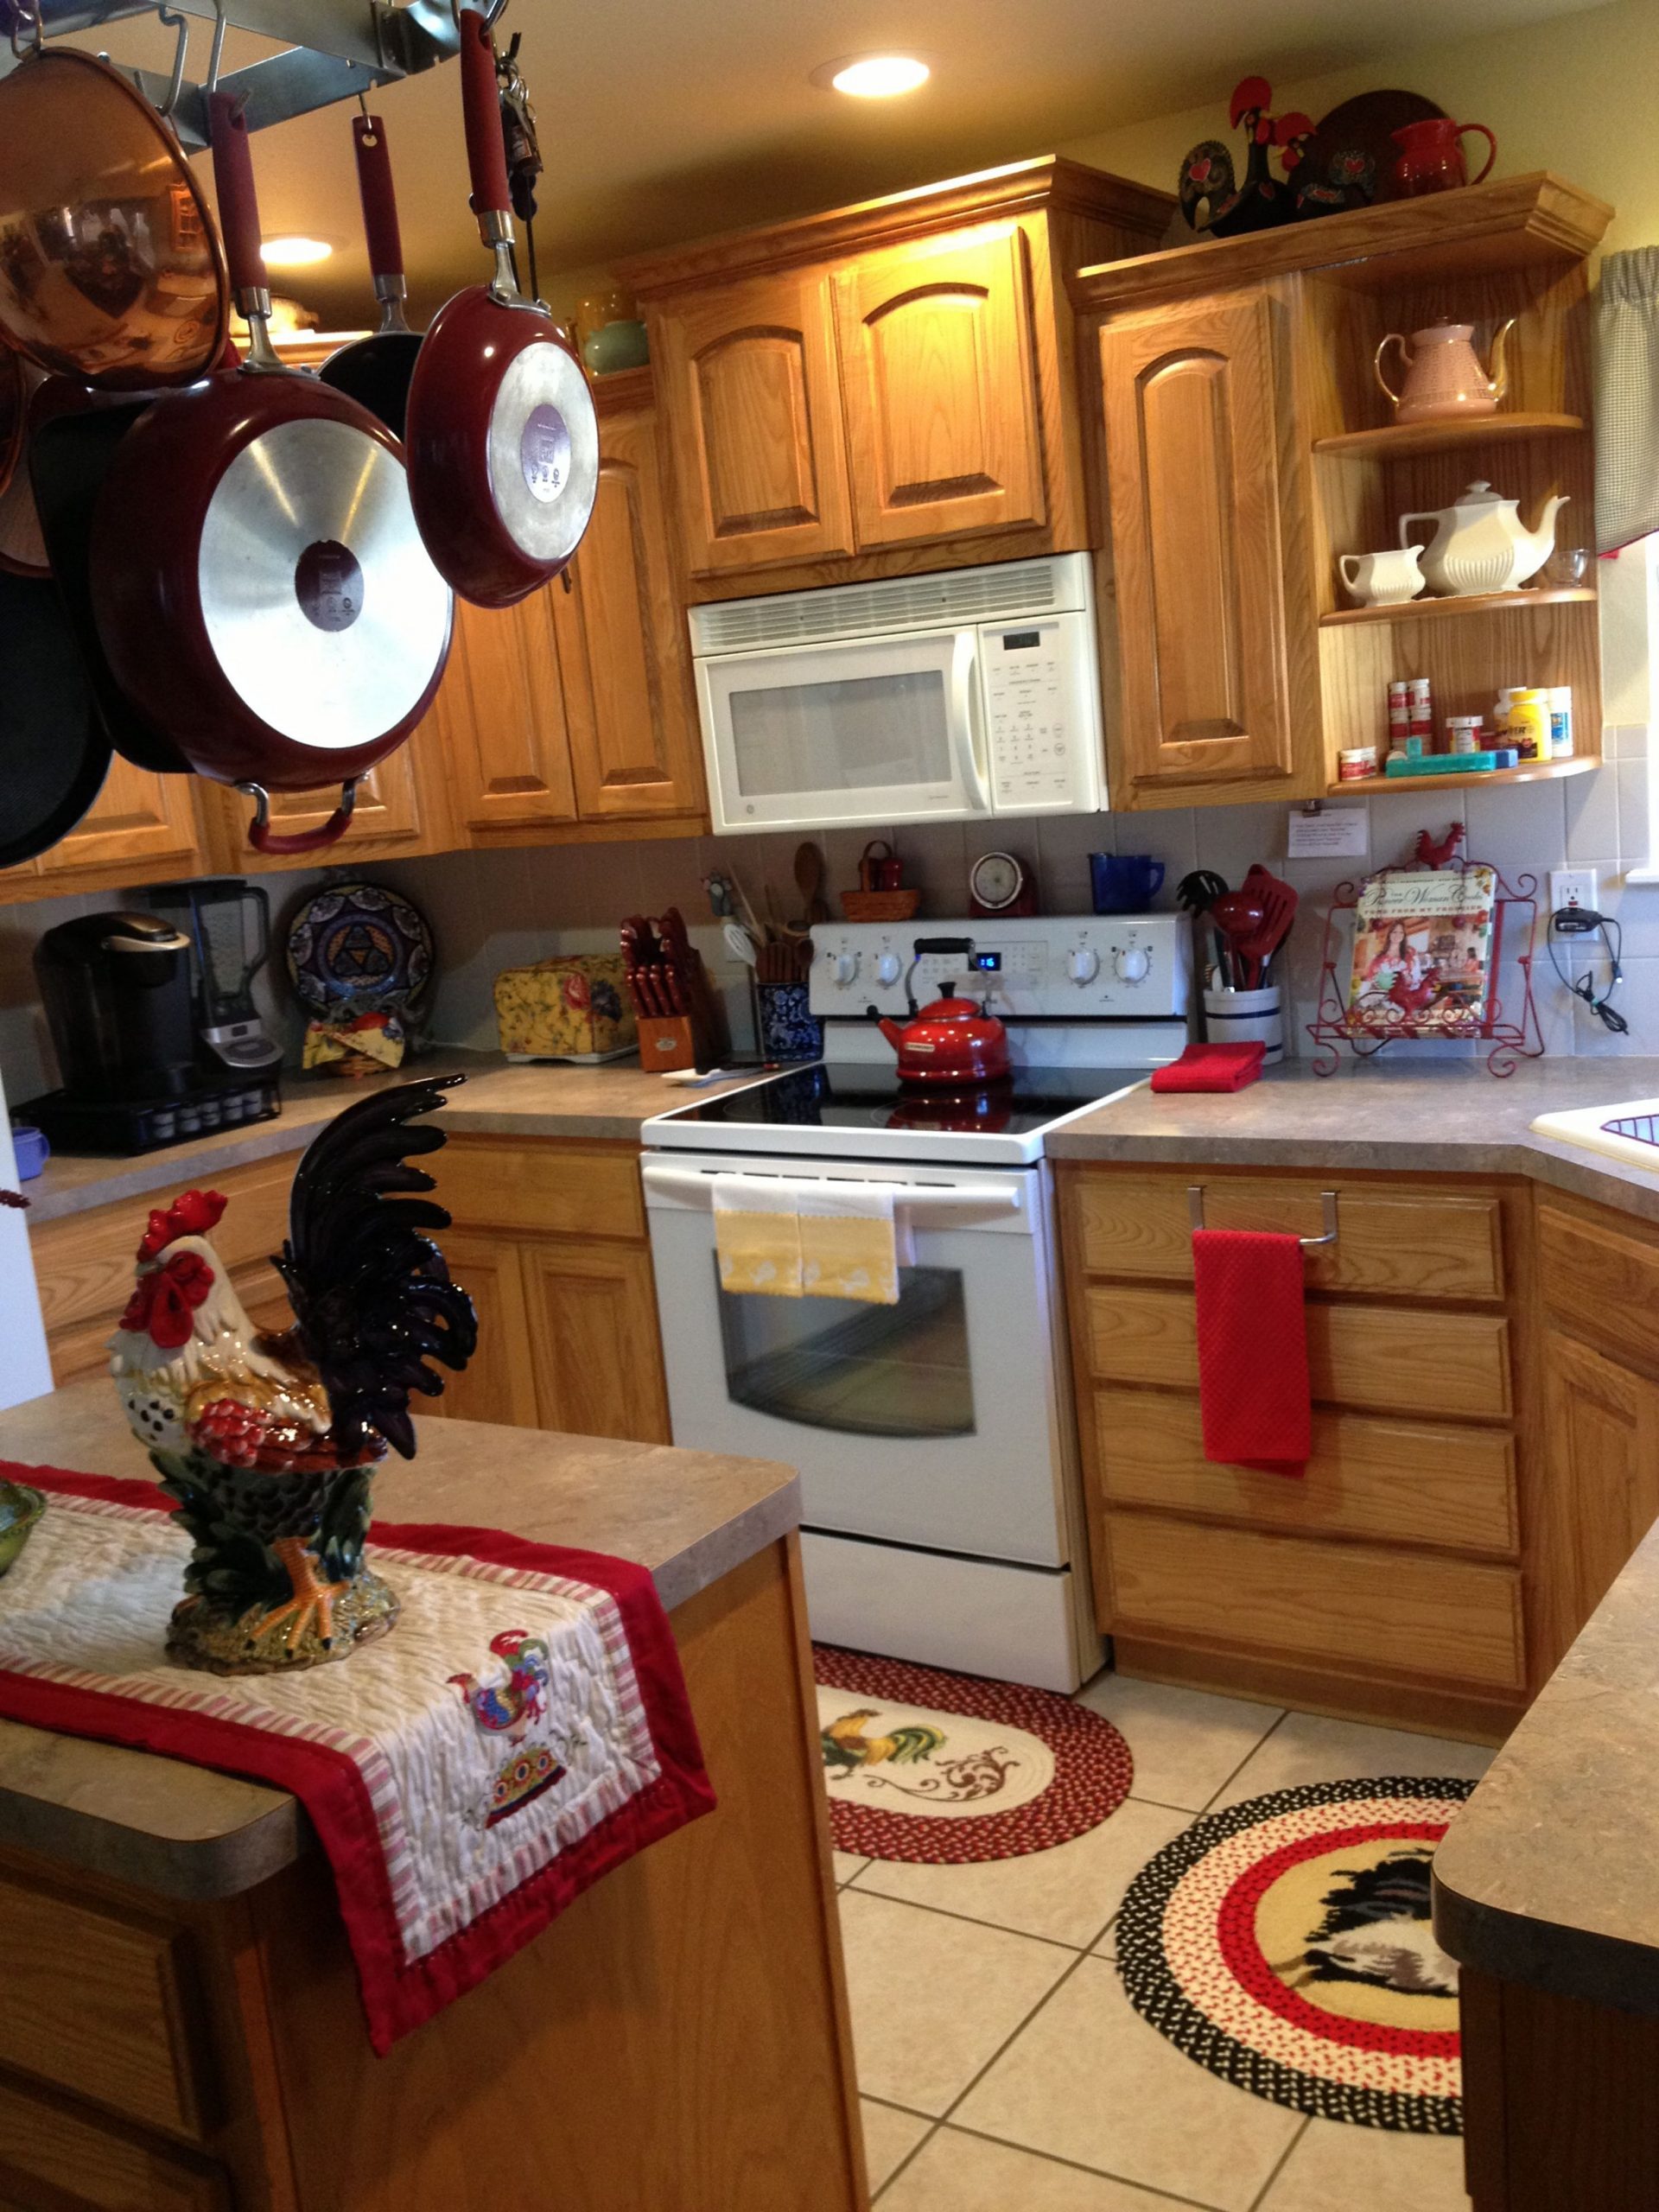 Rooster Kitchen Decor 25 - Moolton avec Rooster Kitchen Decor 